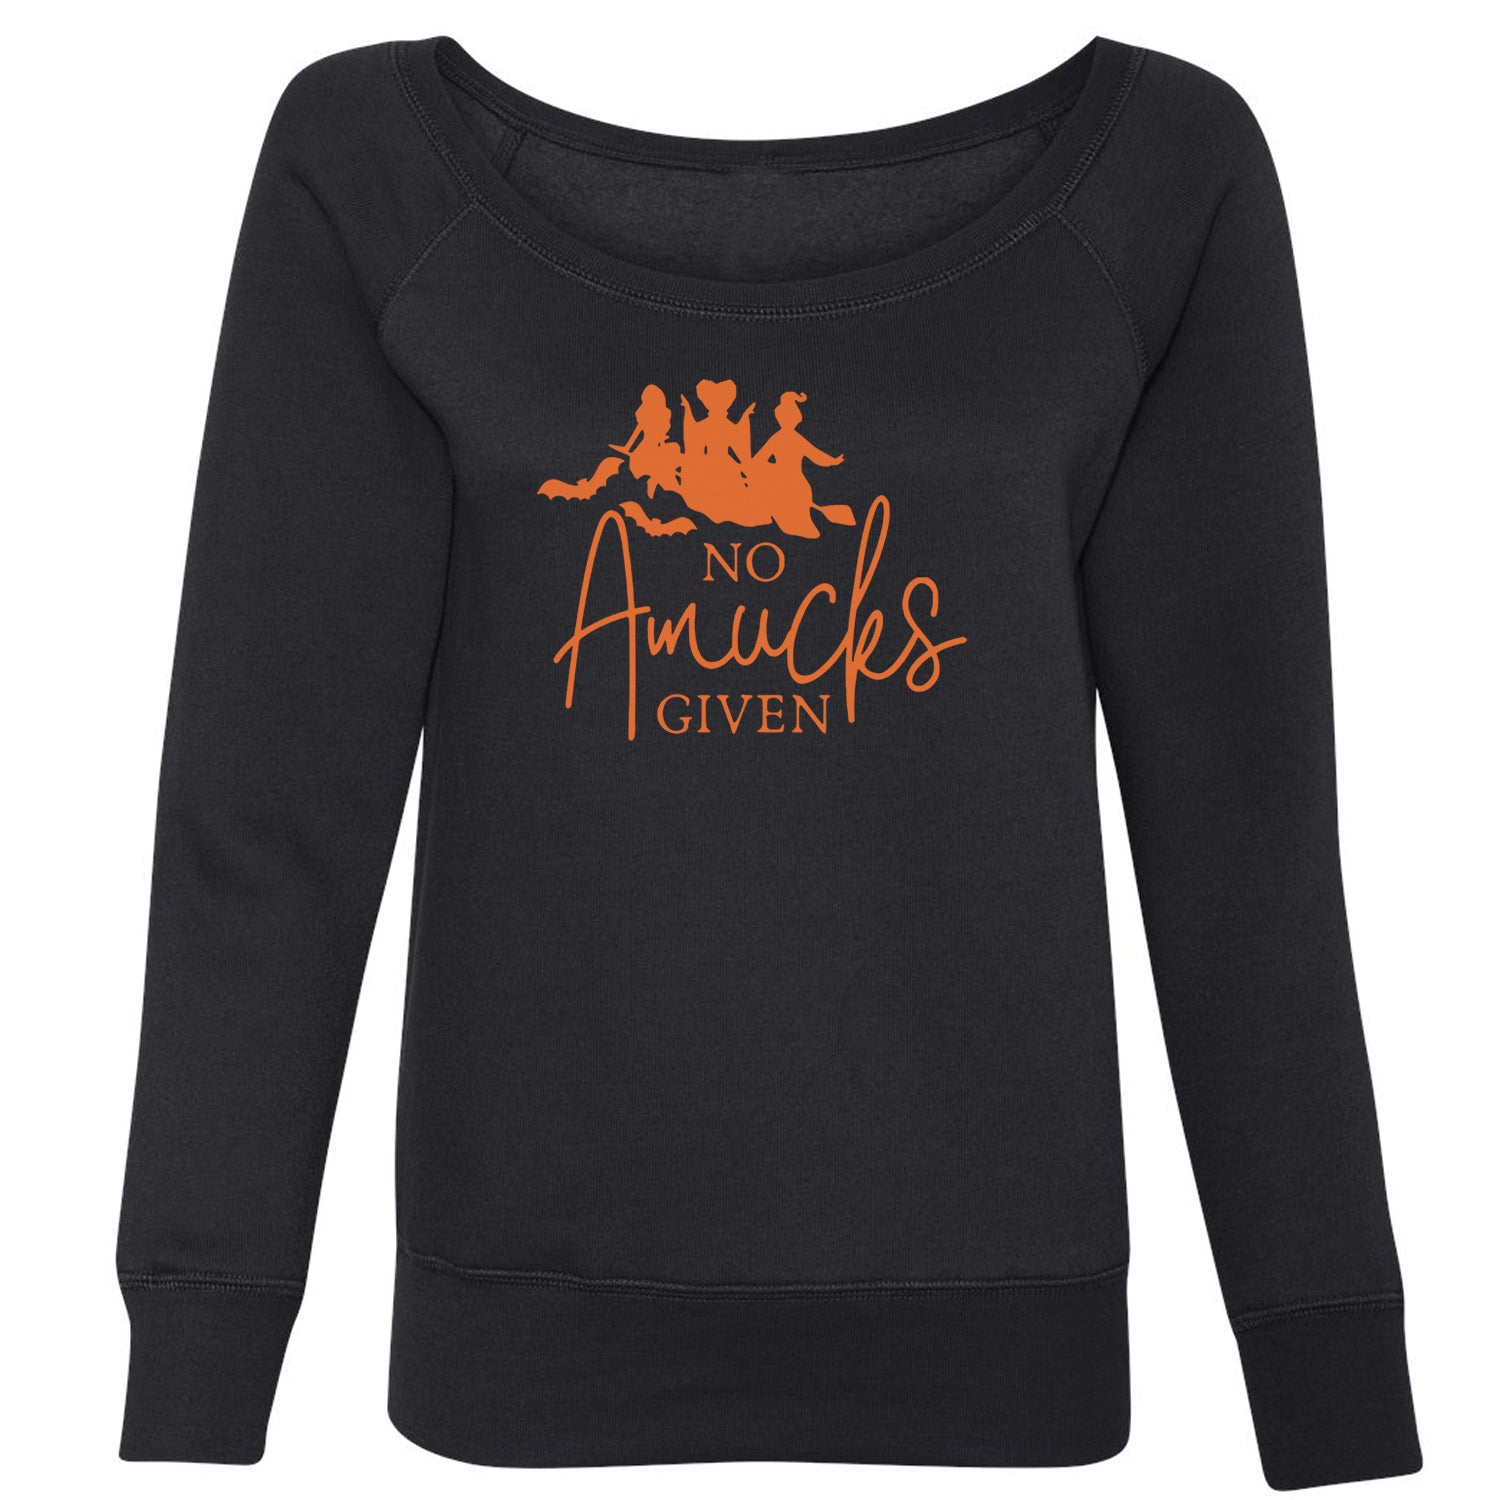 No Amucks Given Hocus Pocus Slouchy Off Shoulder Oversized Sweatshirt descendants, enchanted, eve, hallows, hocus, or, pocus, sanderson, sisters, treat, trick, witches by Expression Tees